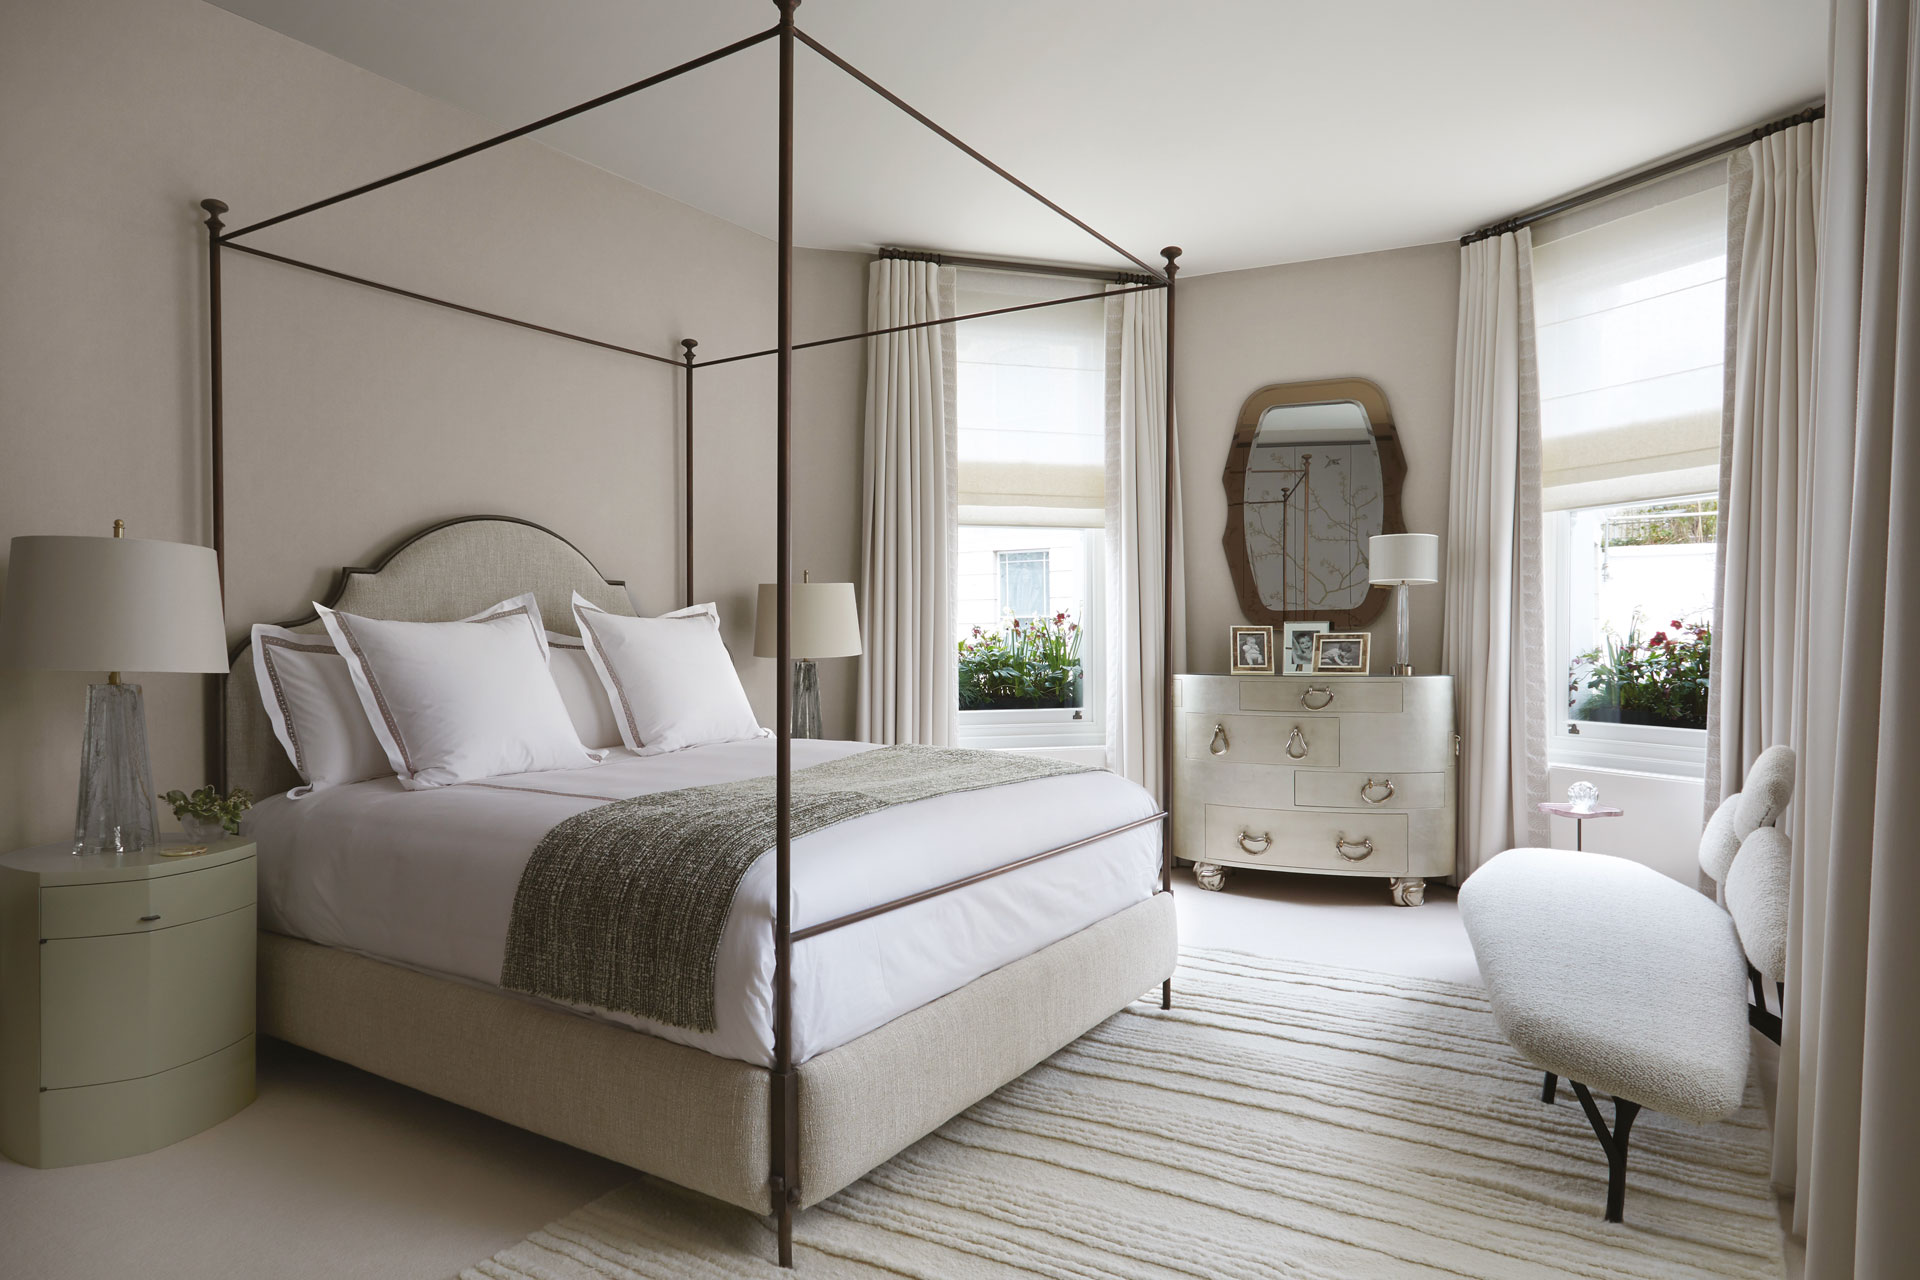 Todhunter Earle, bedroom - London house, done up by interior designers